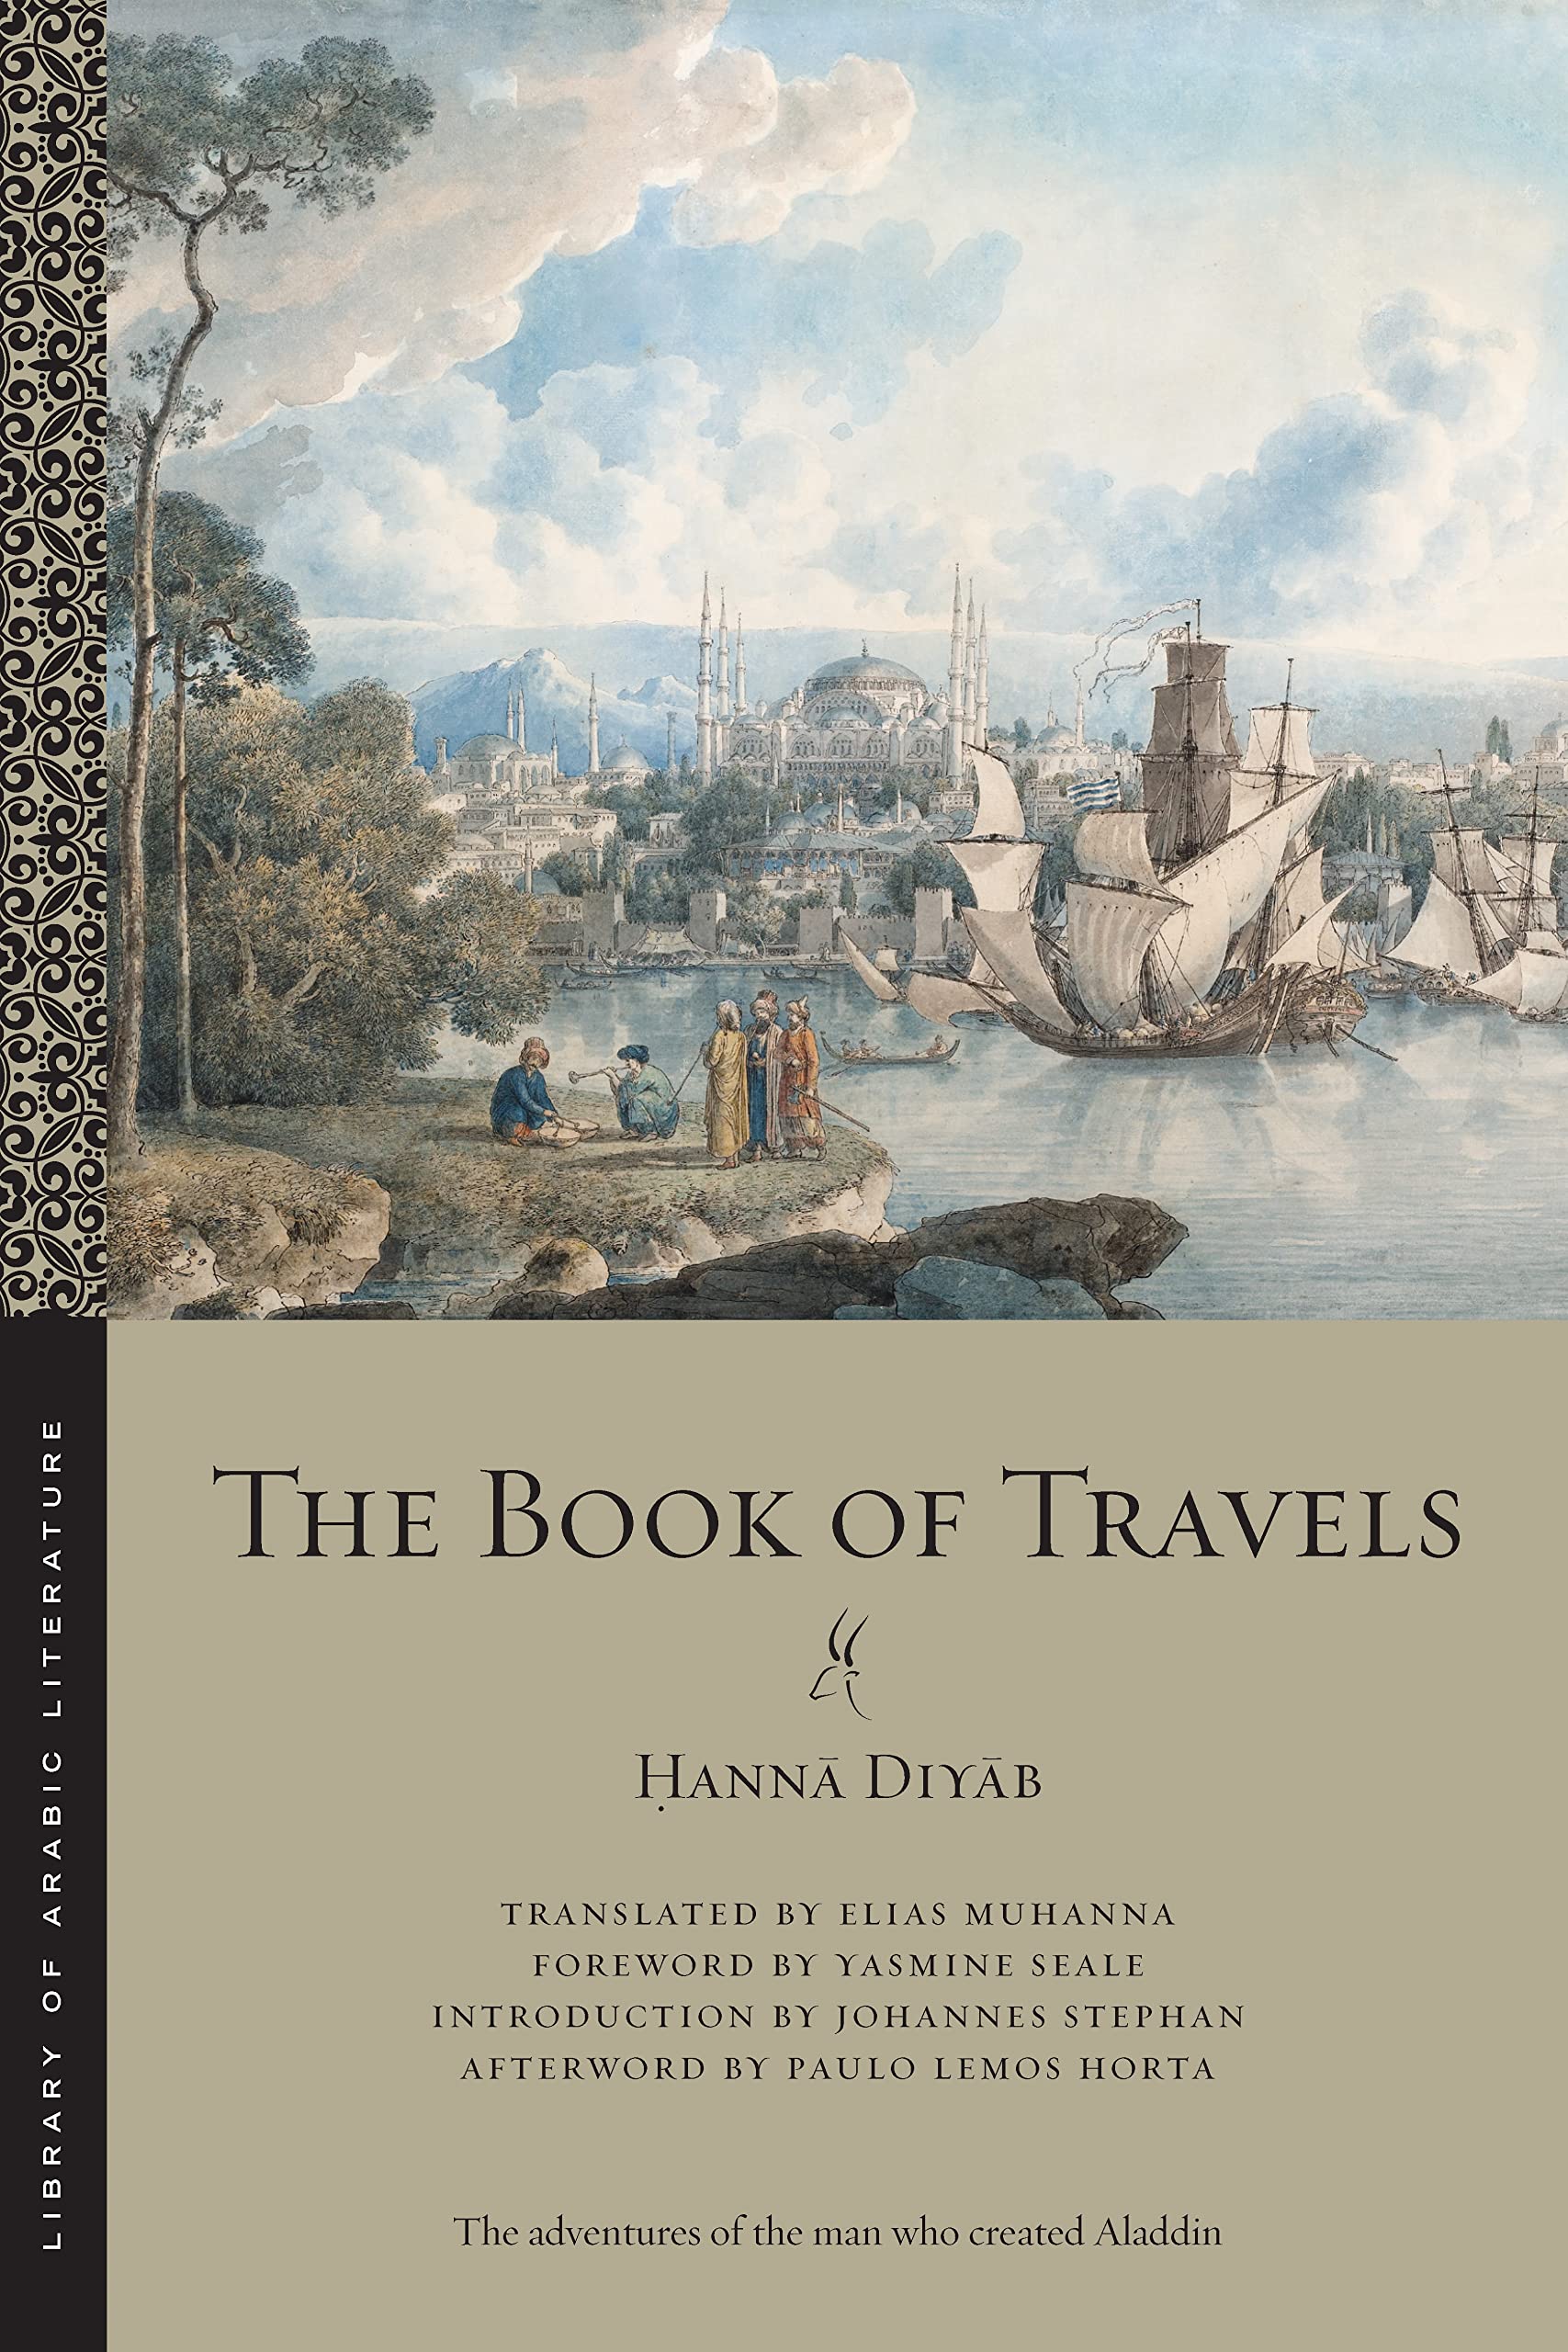 The Book of Travels Library of Arabic Literature by Ḥannā Diyāb